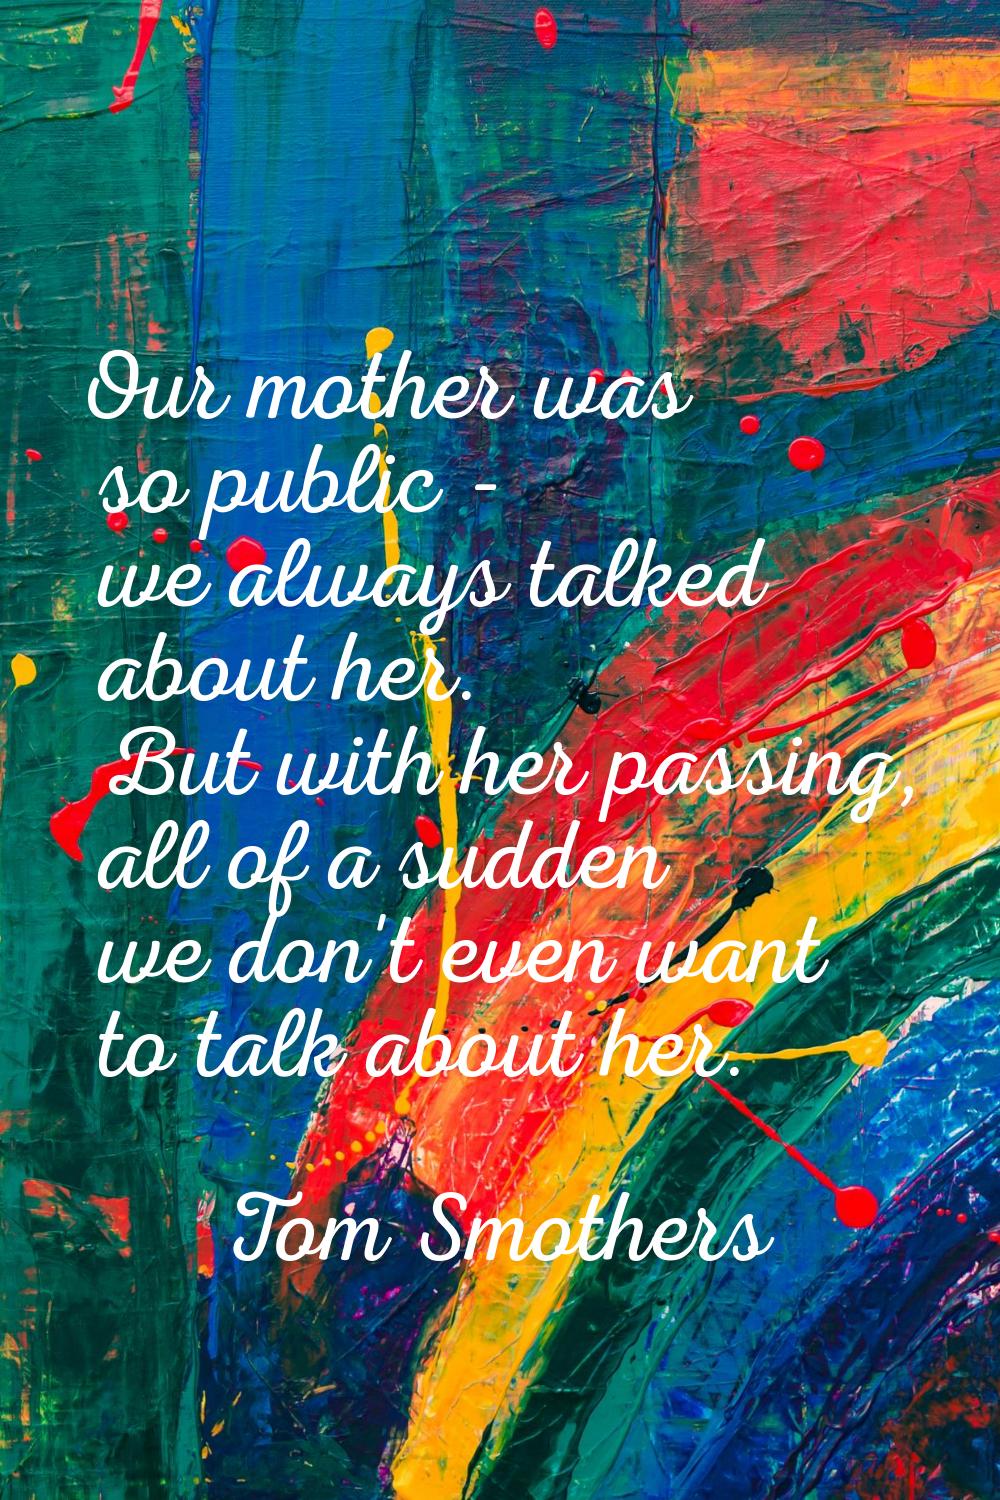 Our mother was so public - we always talked about her. But with her passing, all of a sudden we don